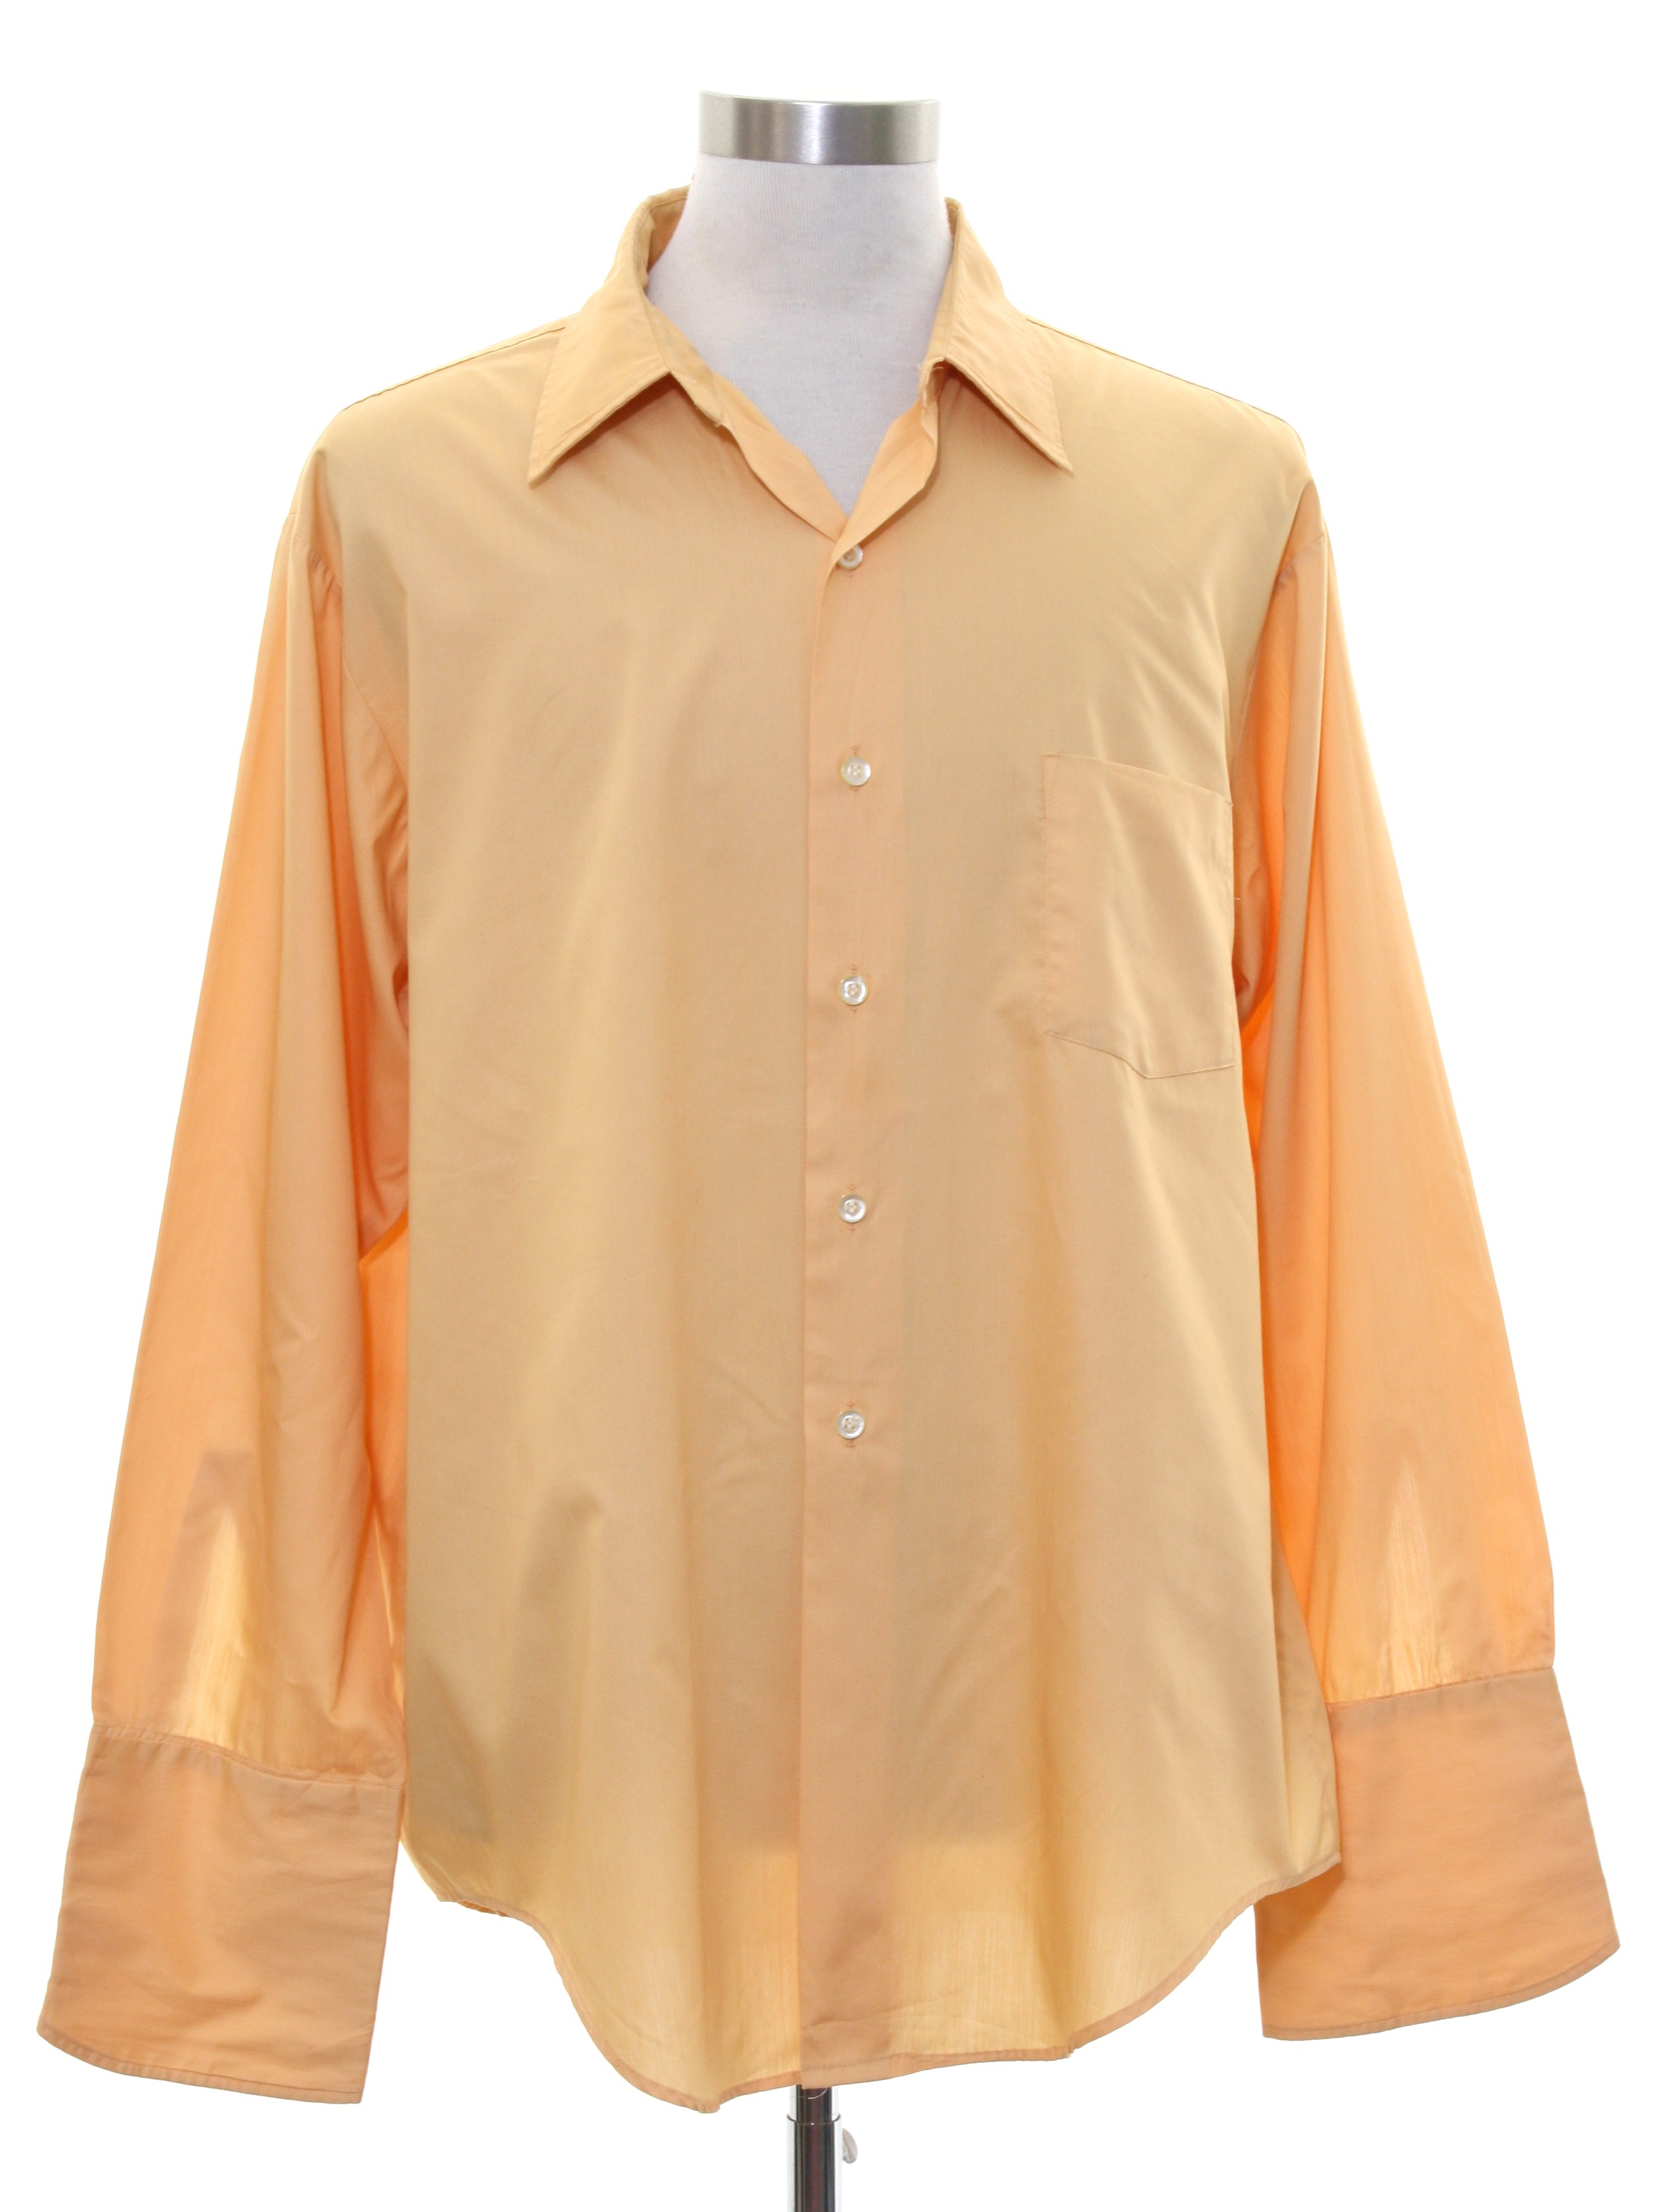 Retro Sixties Shirt: 60s -JcPenney- Mens peach background dacron ...